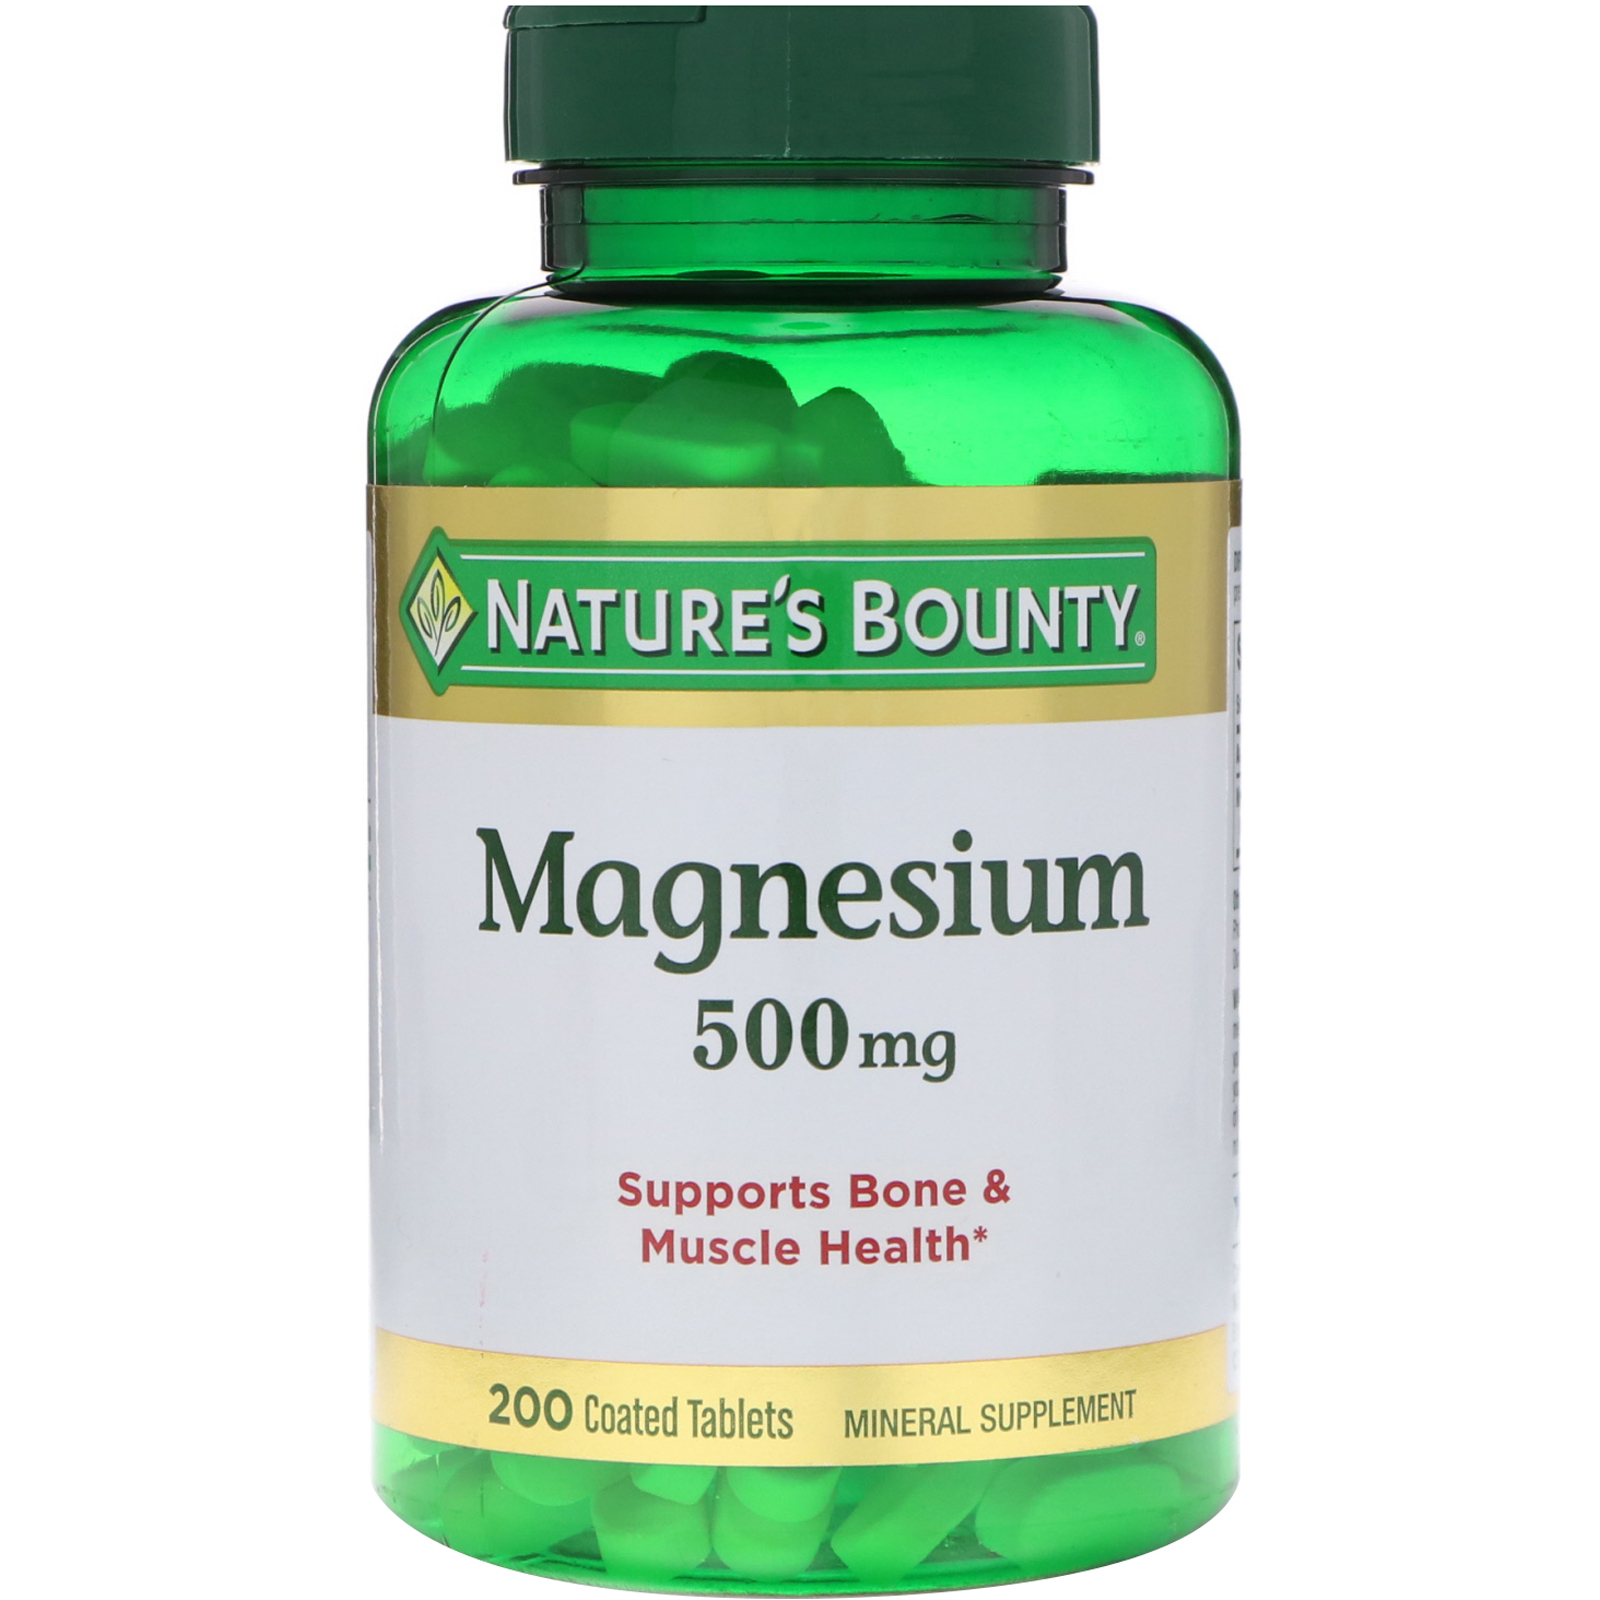 Natures Bounty Magnesium 500 Mg 200 Coated Tablets Iherb